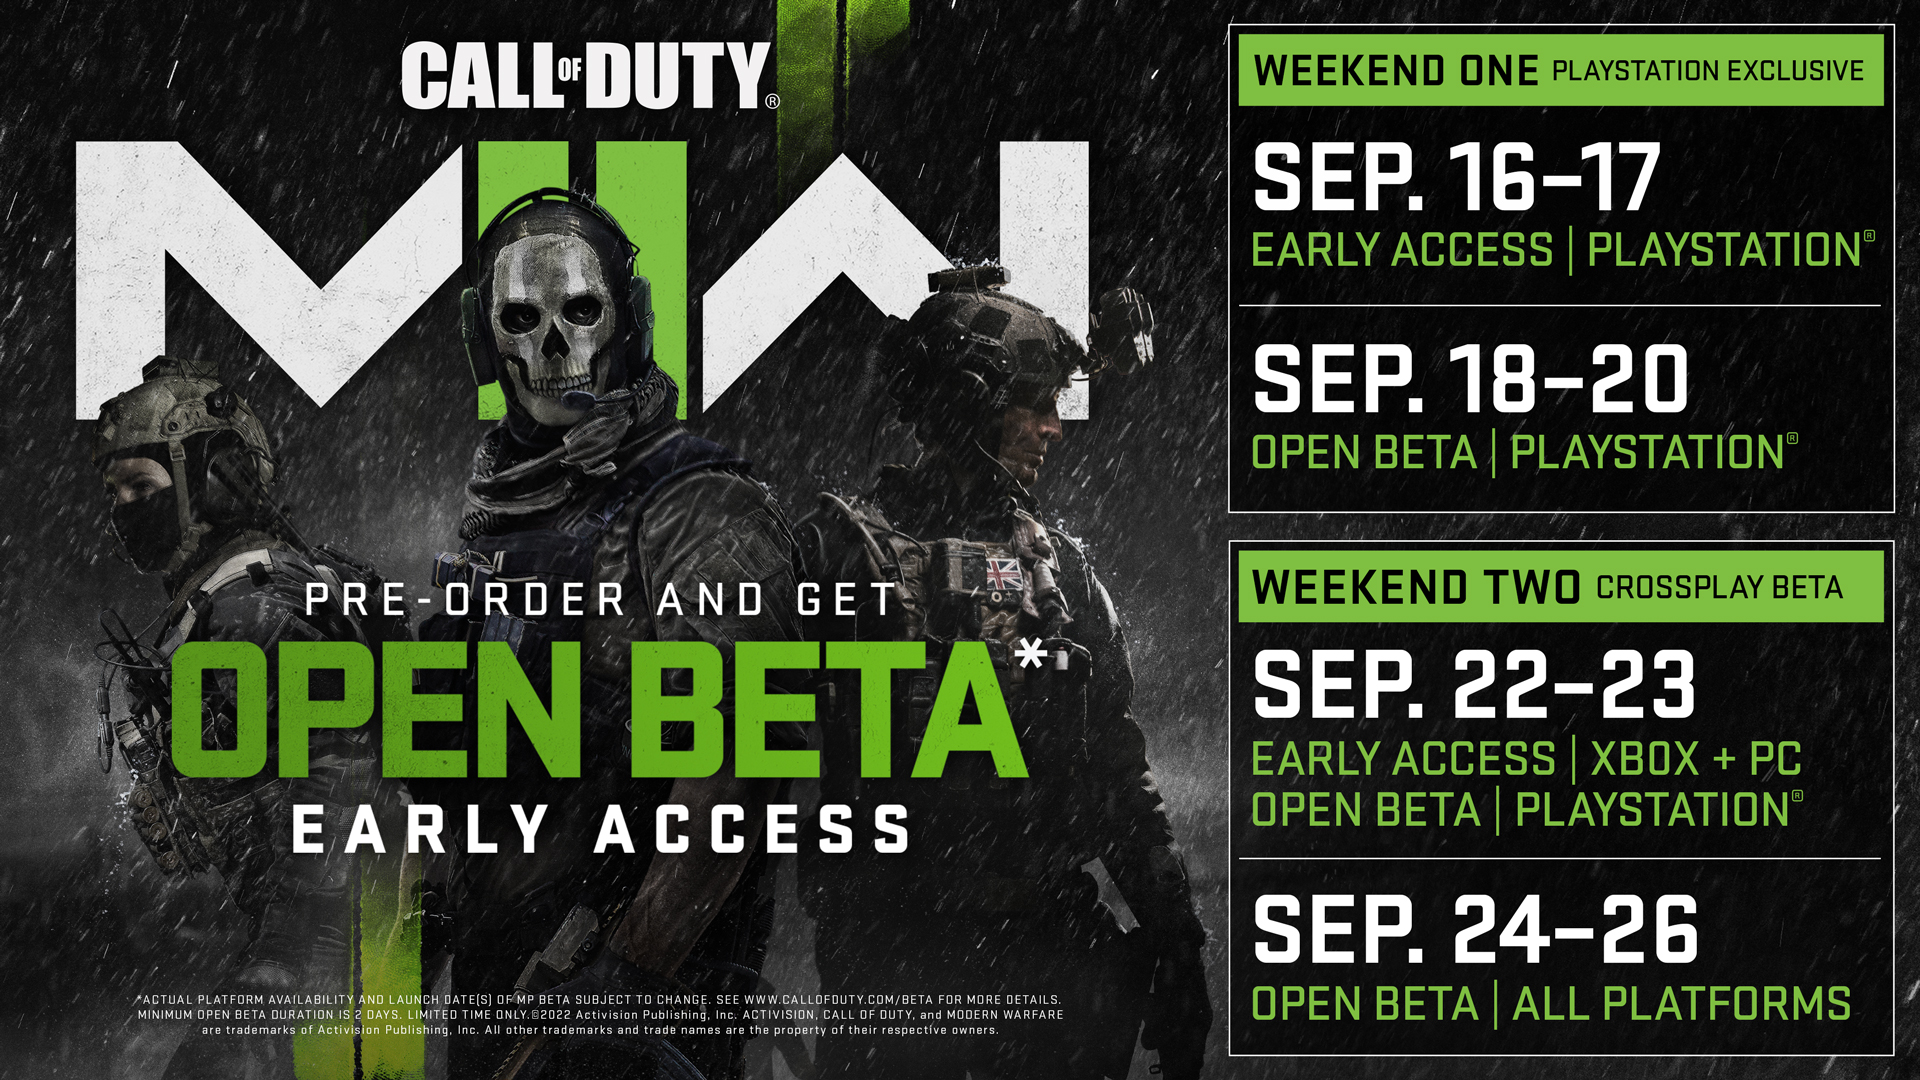 ANNOUNCING CALL OF DUTY®: NEXT, THE FRANCHISE SHOWCASE EVENT, AND OPEN BETA DATE TIMES FOR CALL OF DUTY®: MODERN WARFARE® II.